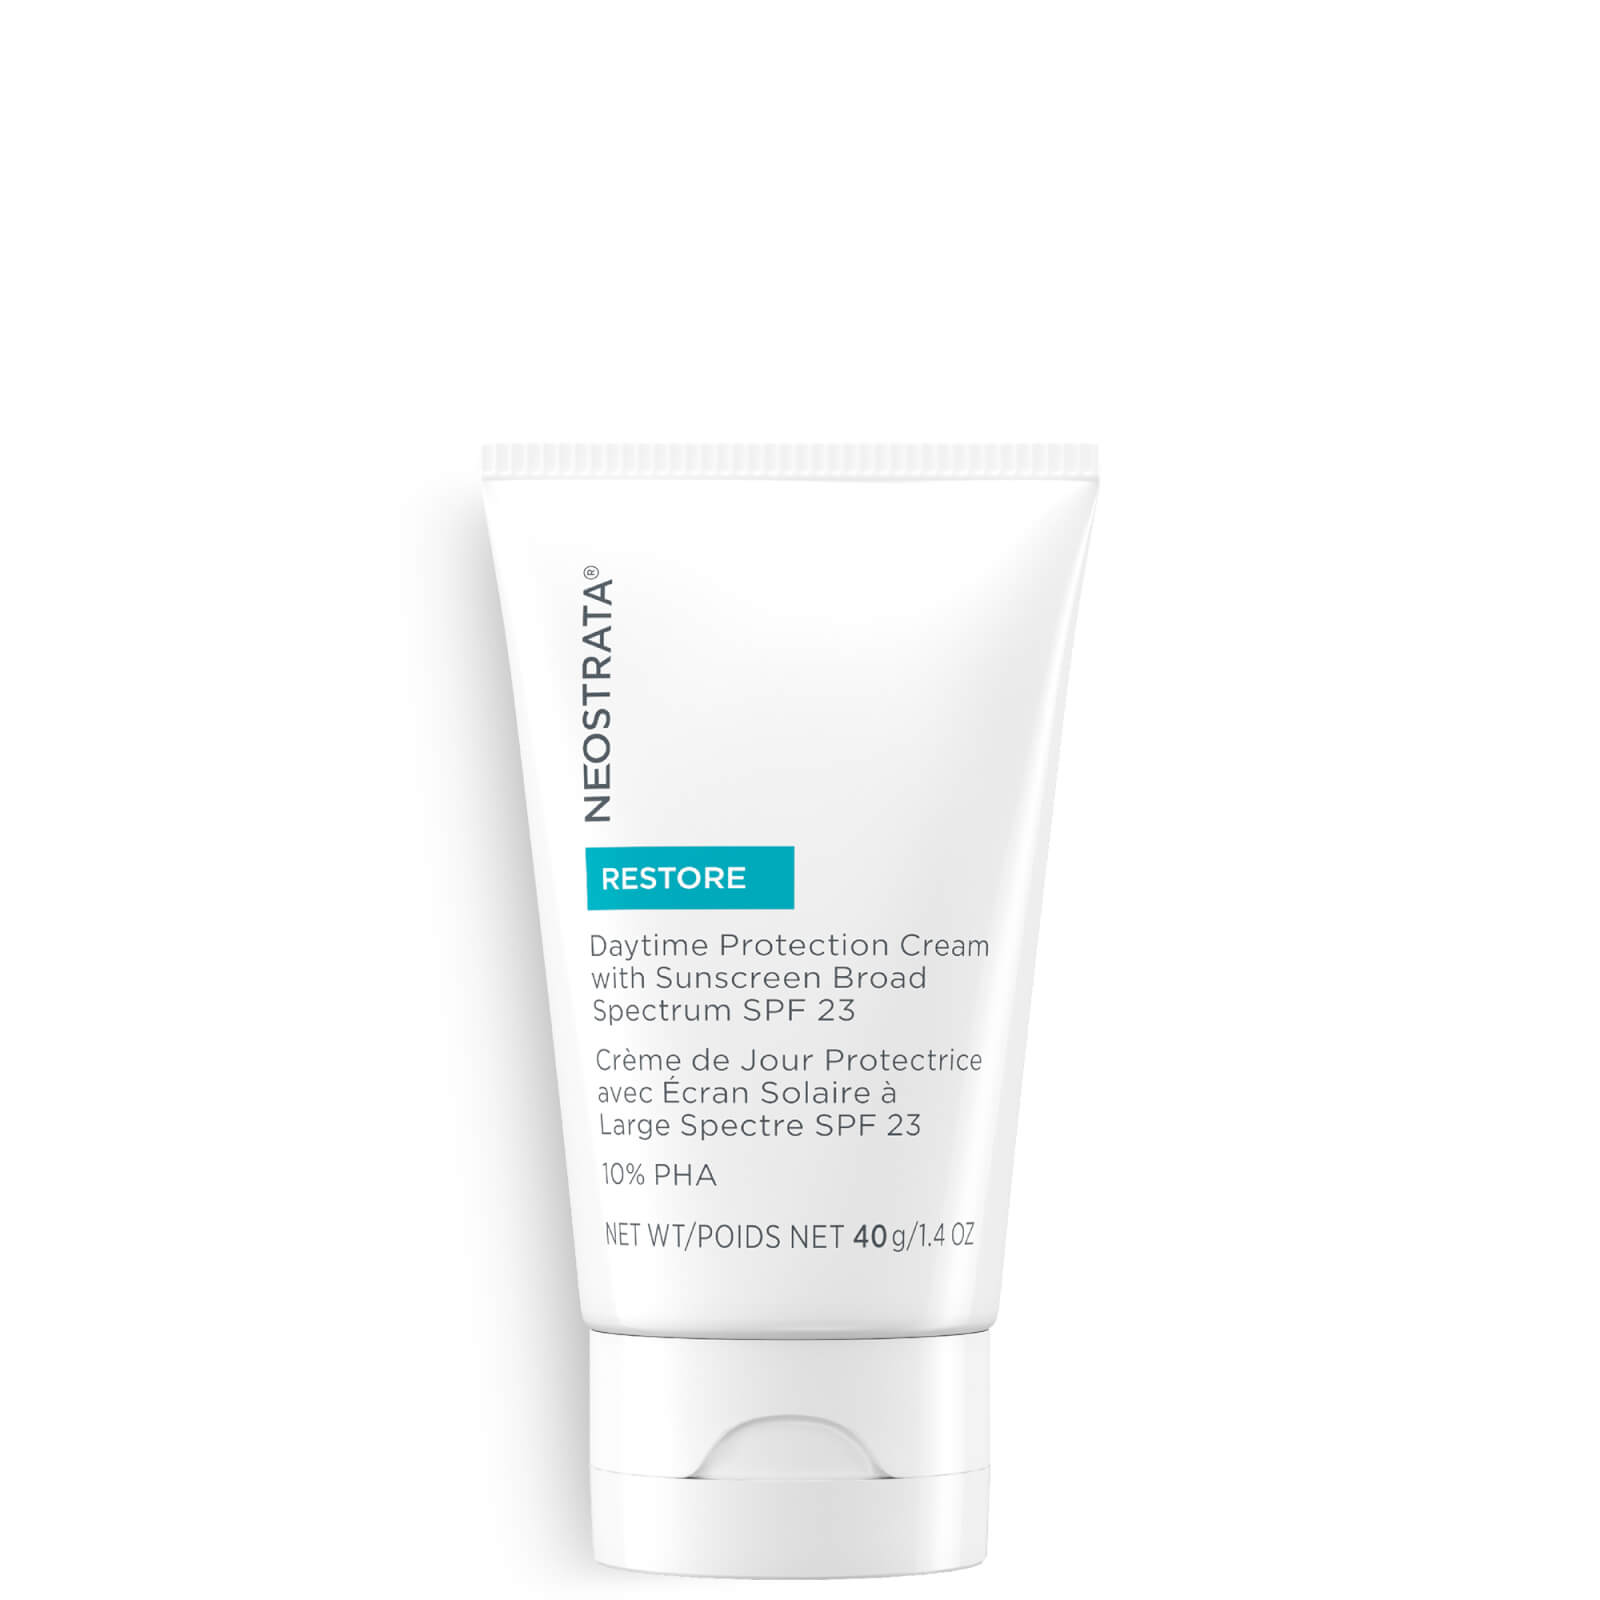 Image of Neostrata Restore Daytime Protection Cream Suncream for Face with SPF 23 40g